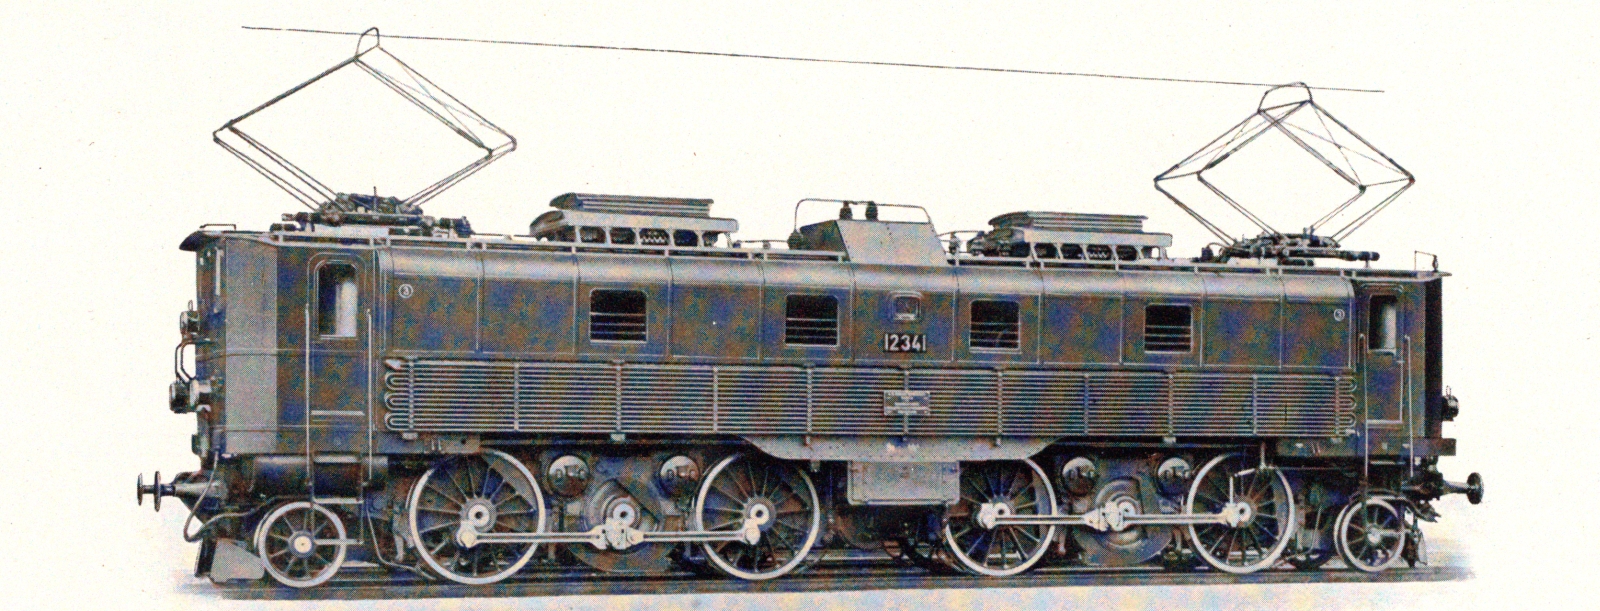 View of No. 12341 in the SLM data sheet